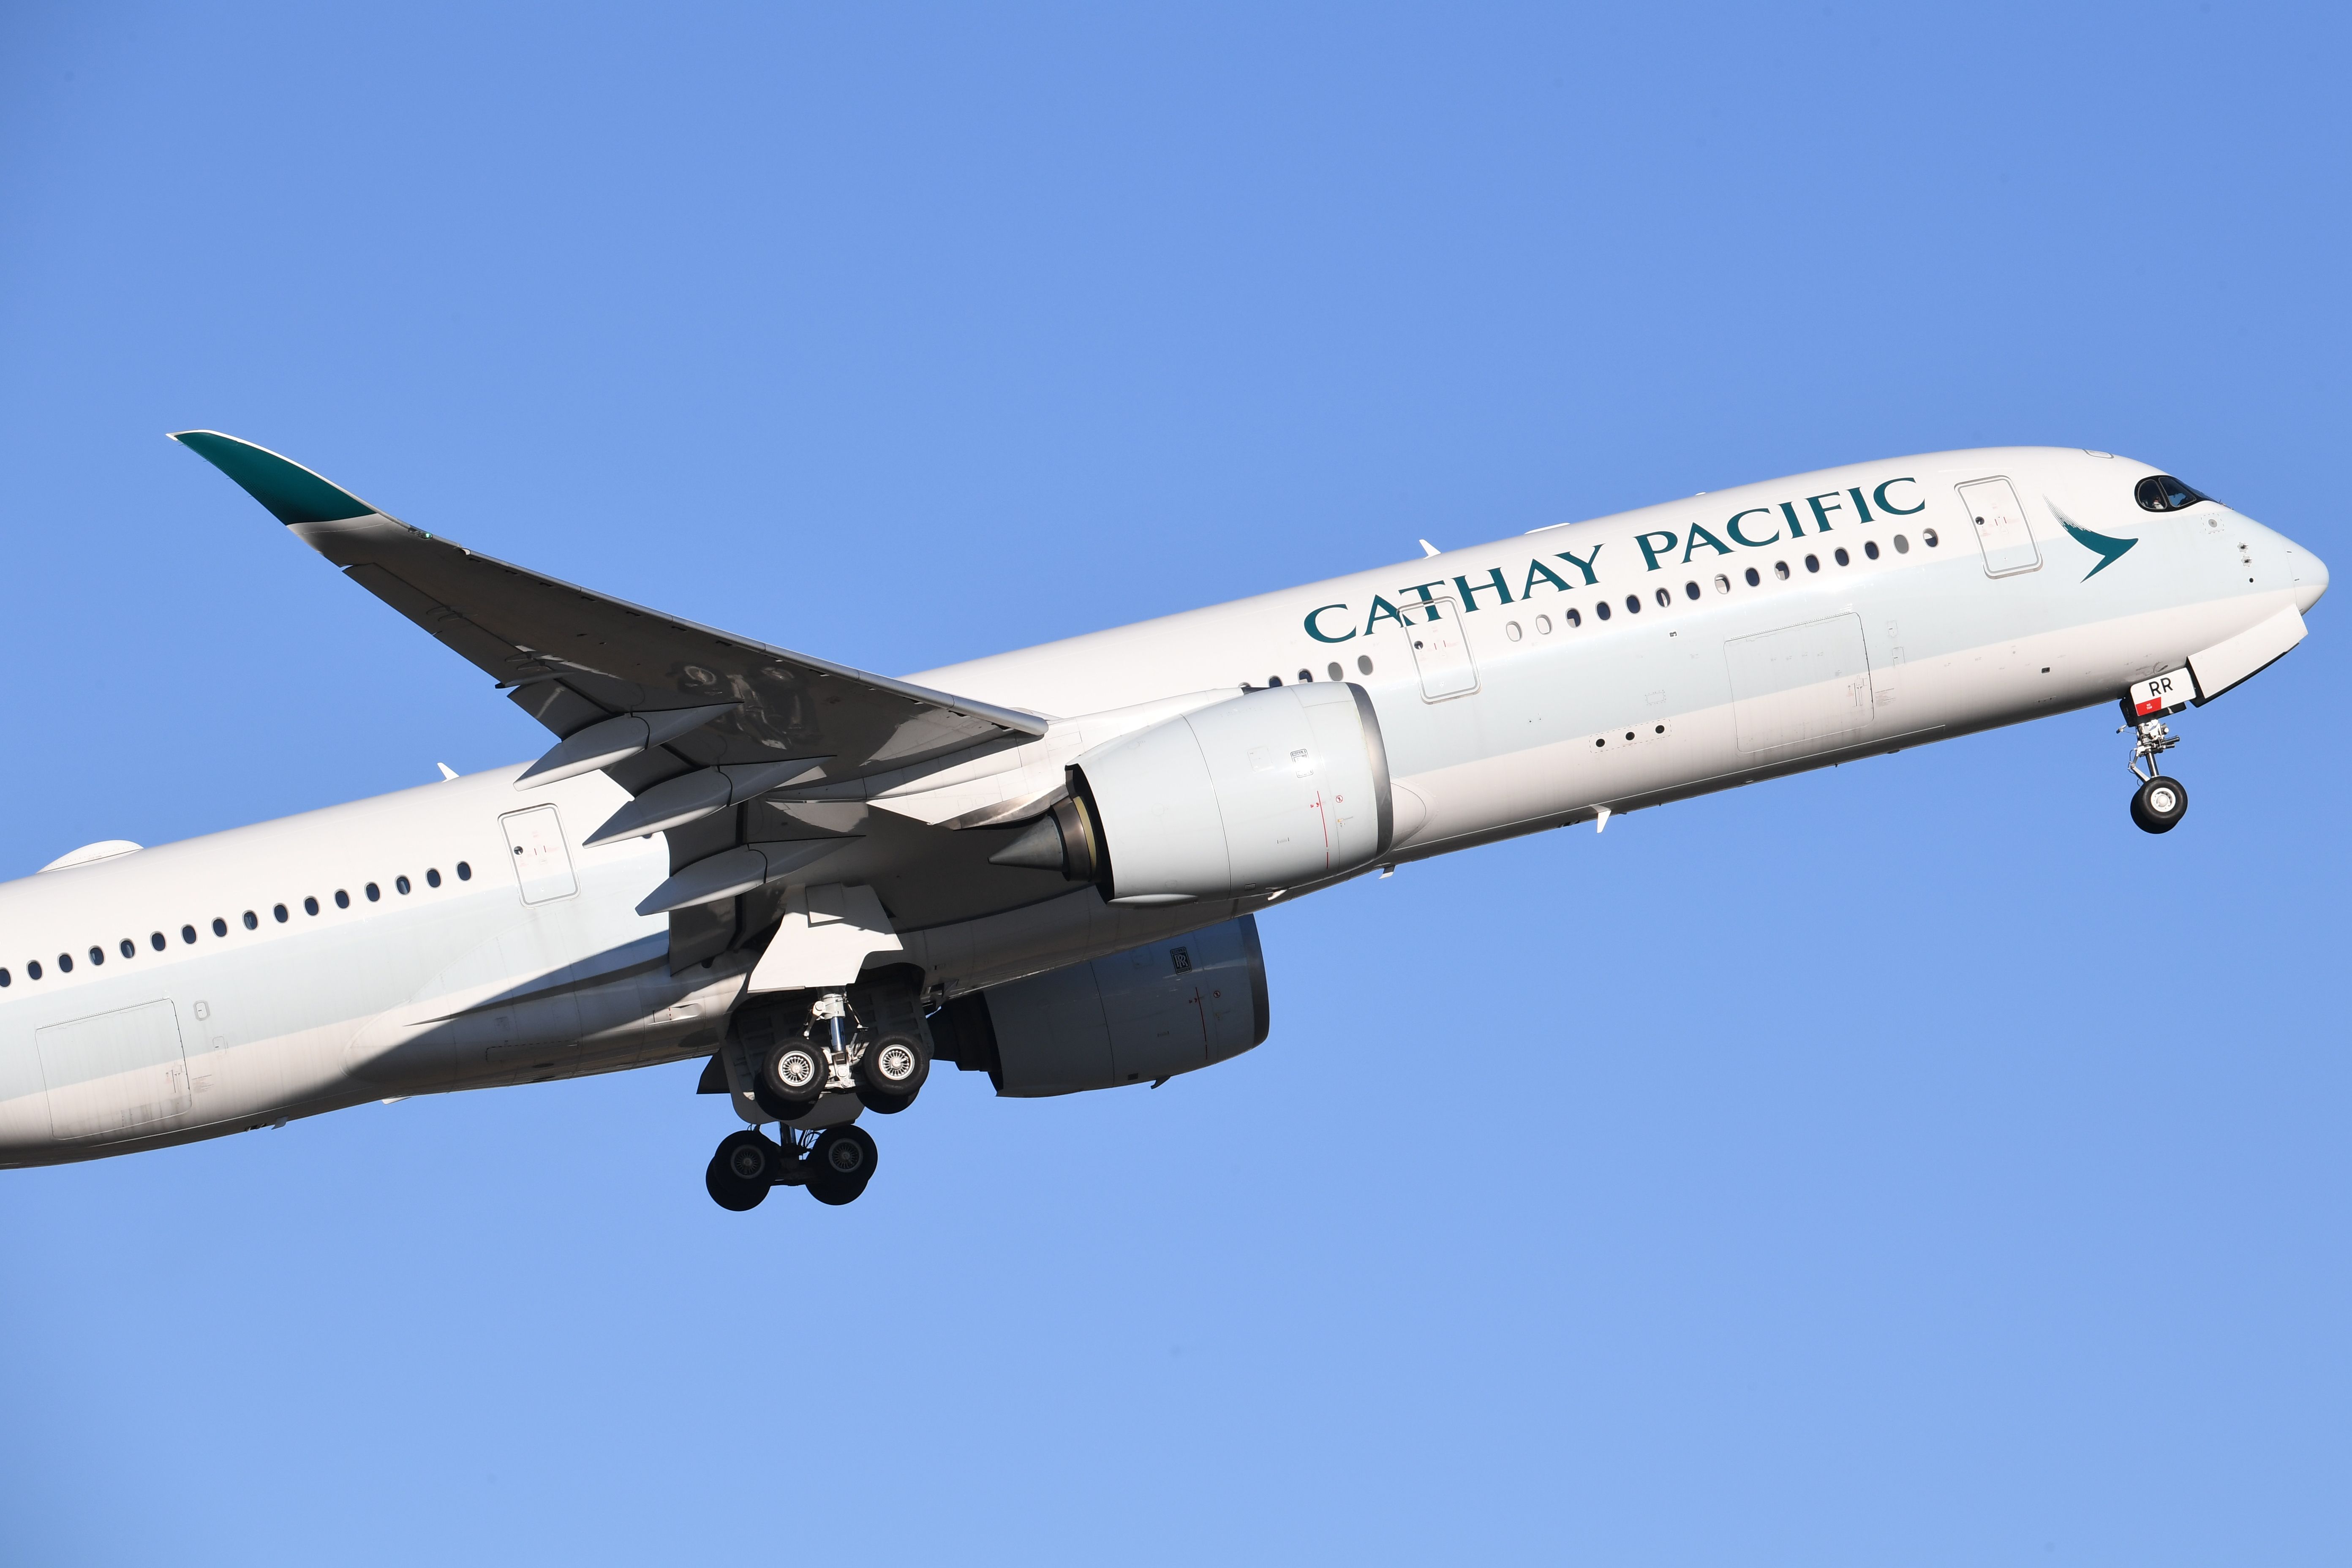 A Cathay Pacific aircraft at Sydney's Kingsford Smith International airport on August 25, 2021 in Sydney, Australia.